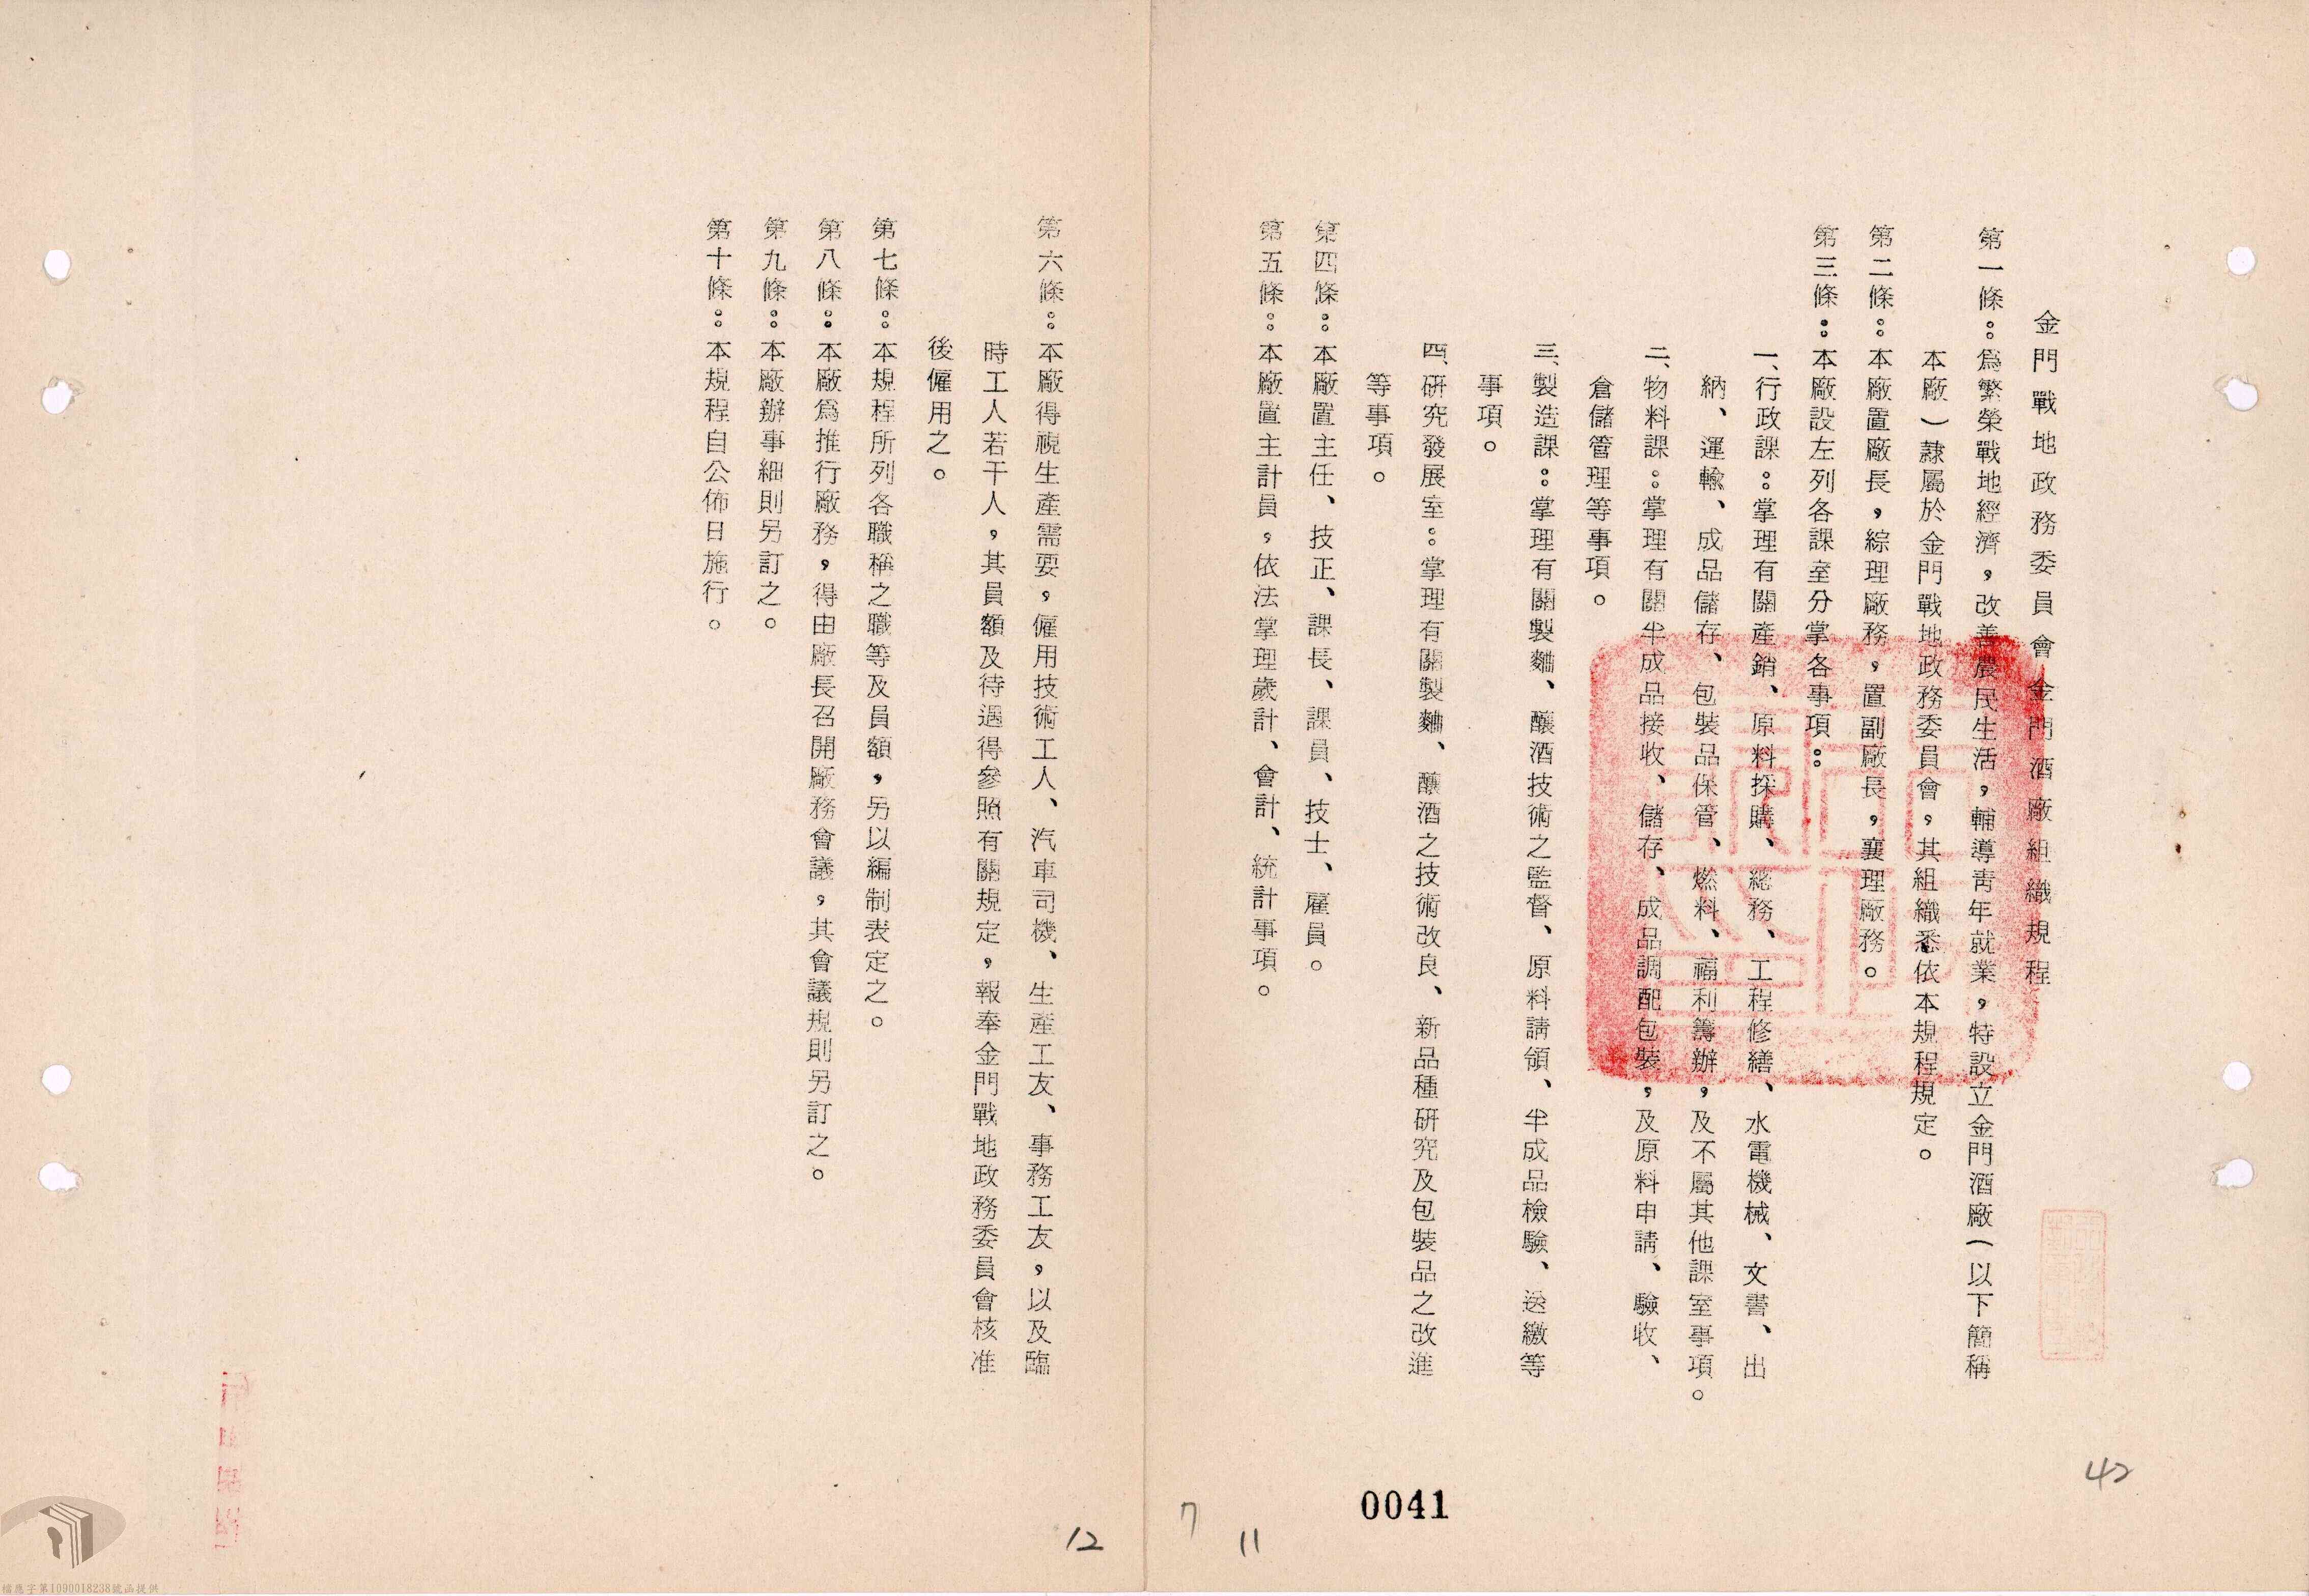 February 1, 1972, Organizational Regulations of the Kinmen Distillery of the Military Administrative Committee.